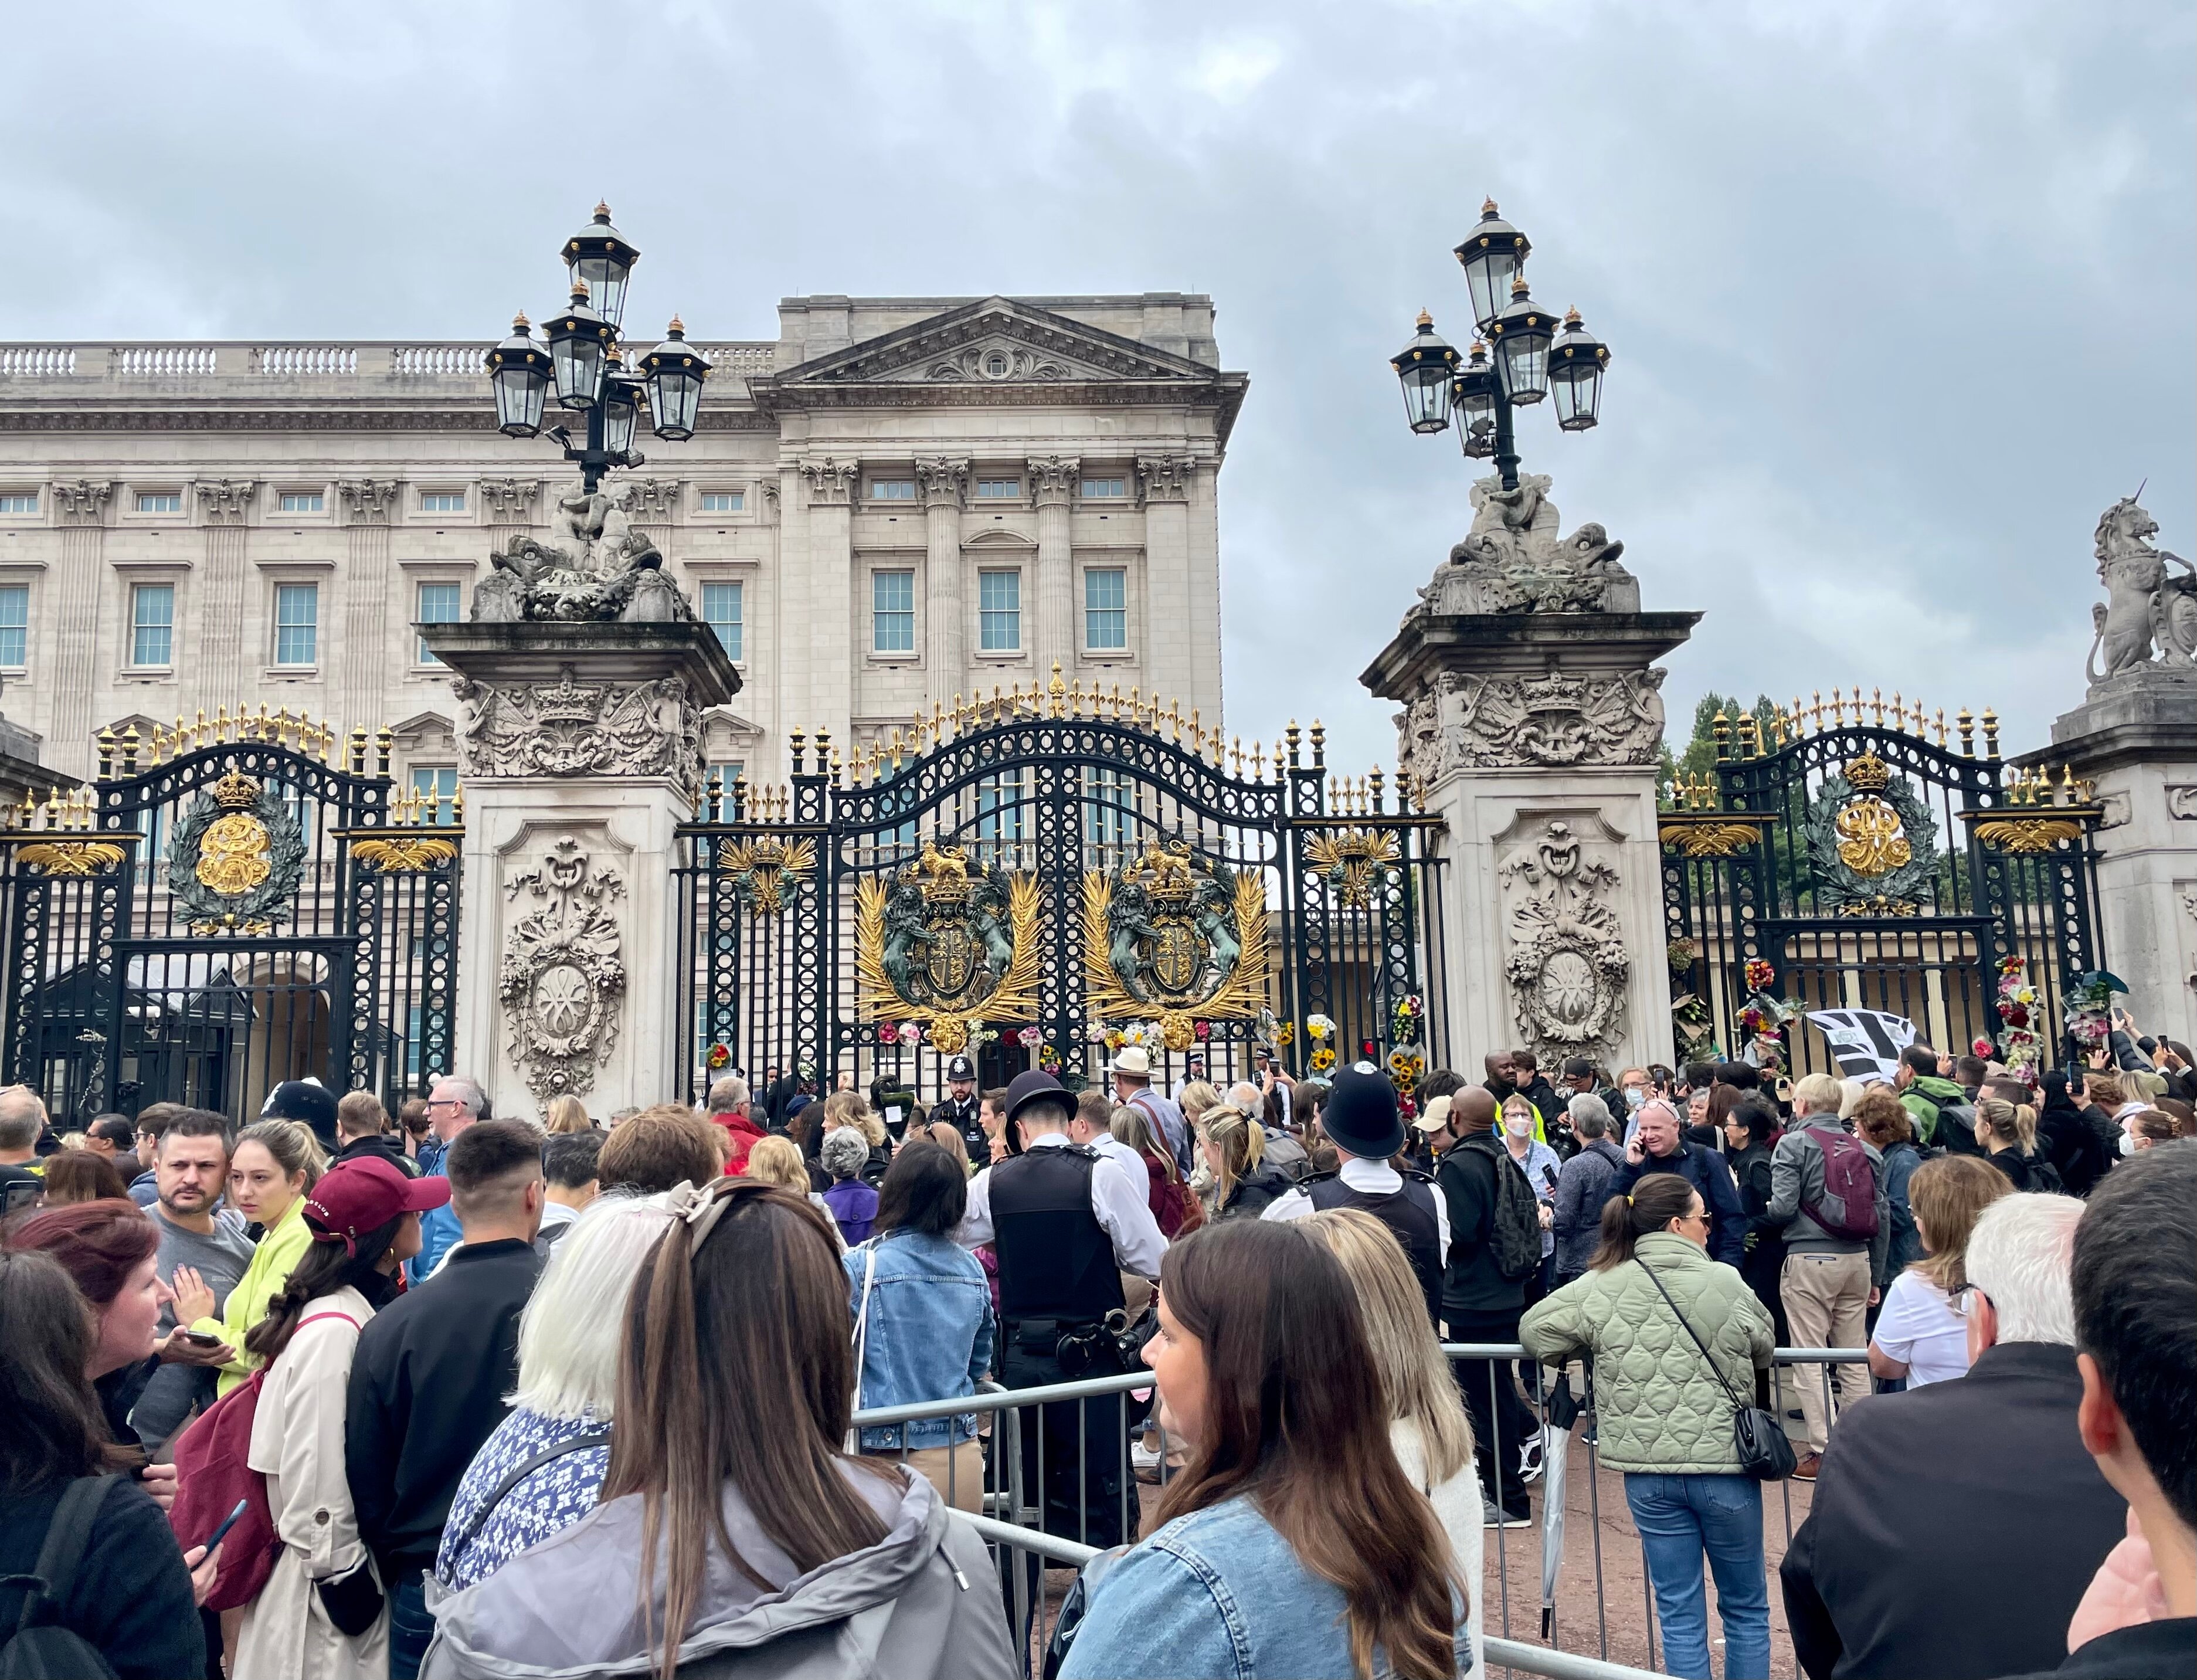 Hotels in London and Windsor ‘sold out’ ahead of Queen’s funeral